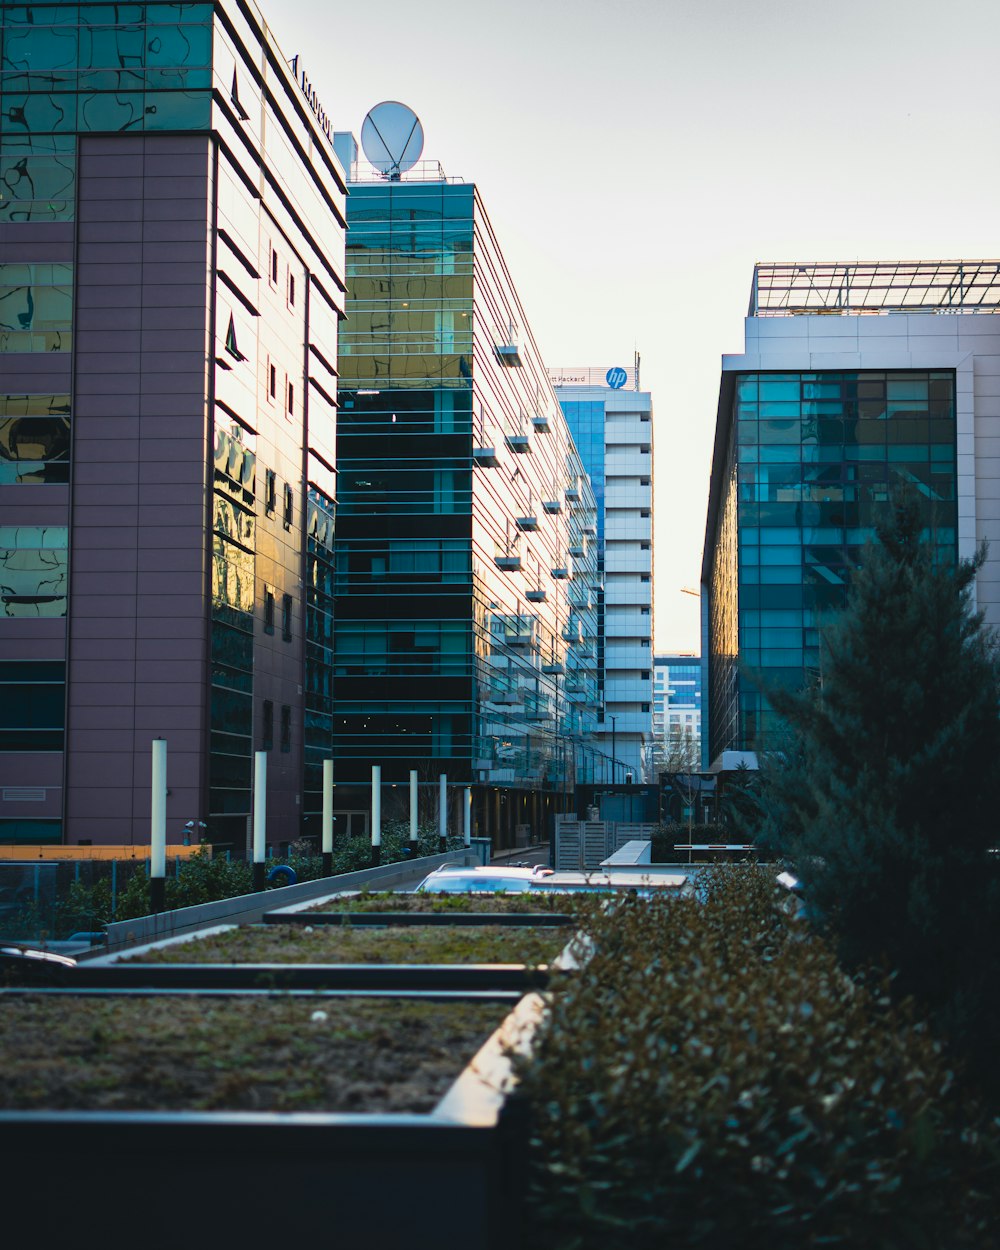 a row of buildings in a city with a green roof